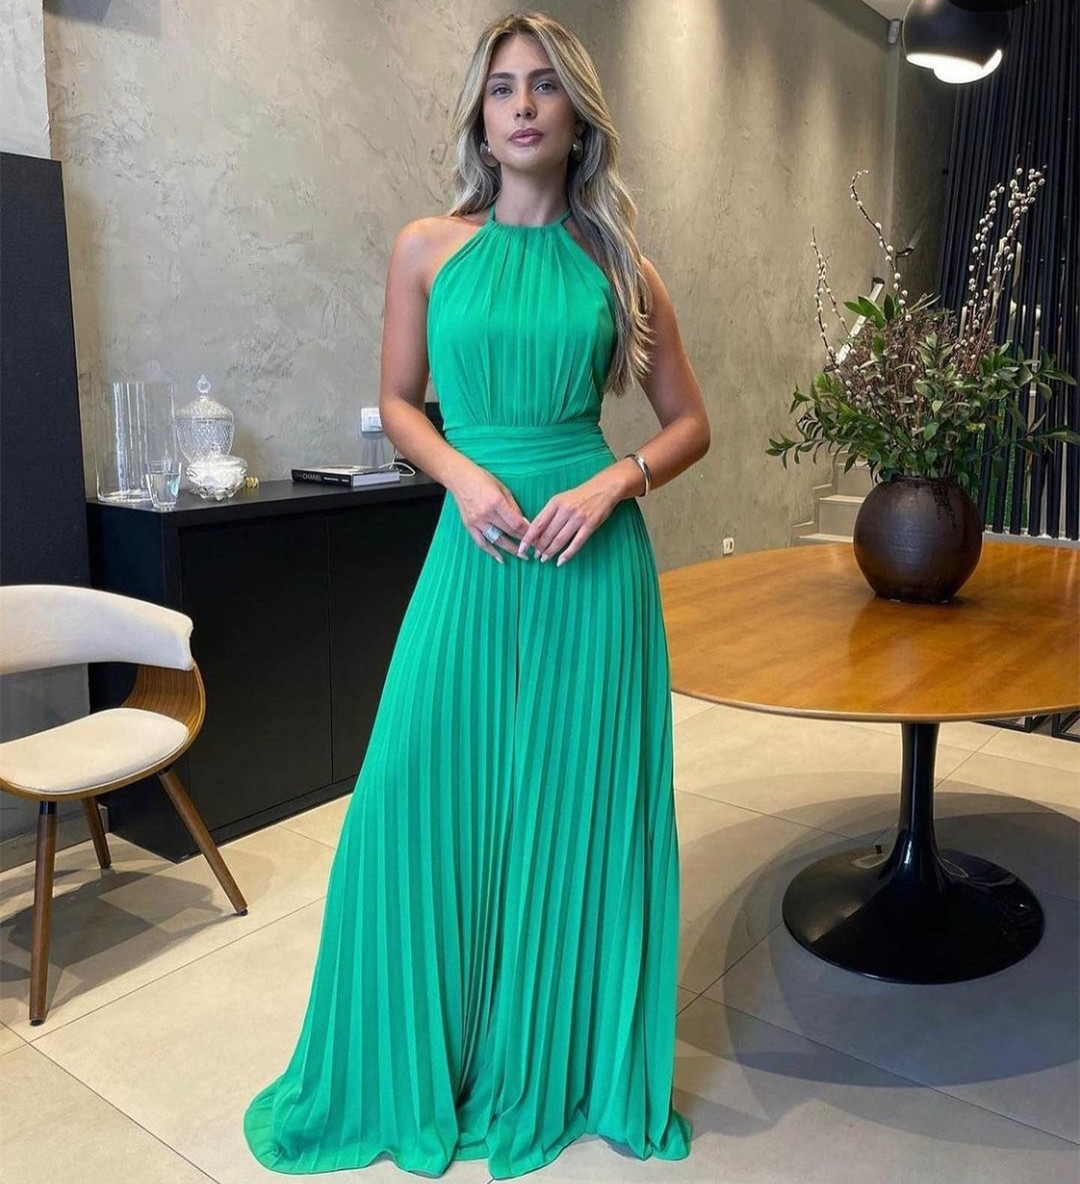 Vintage Long Halter Chiffon Prom Dresses A-Line Ruched Green Floor Length Zipper Back Formal Party Evening Dress Robes de Soiree for Women